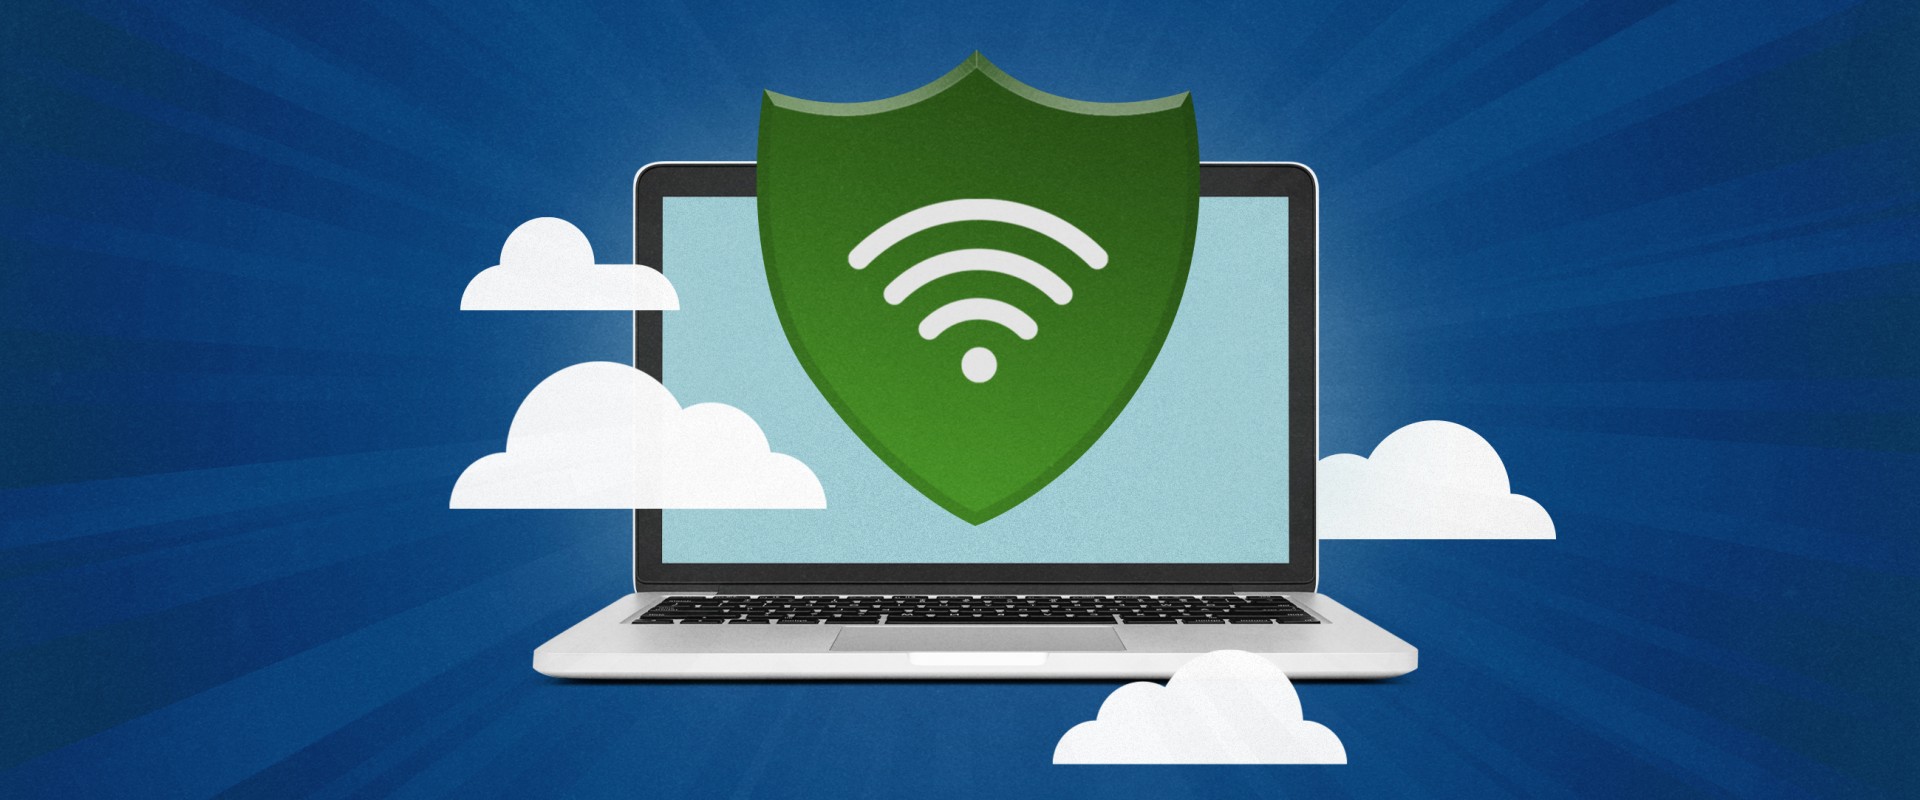 The Best VPN for Maximum Security: Which One Has the Most Secure Encryption?